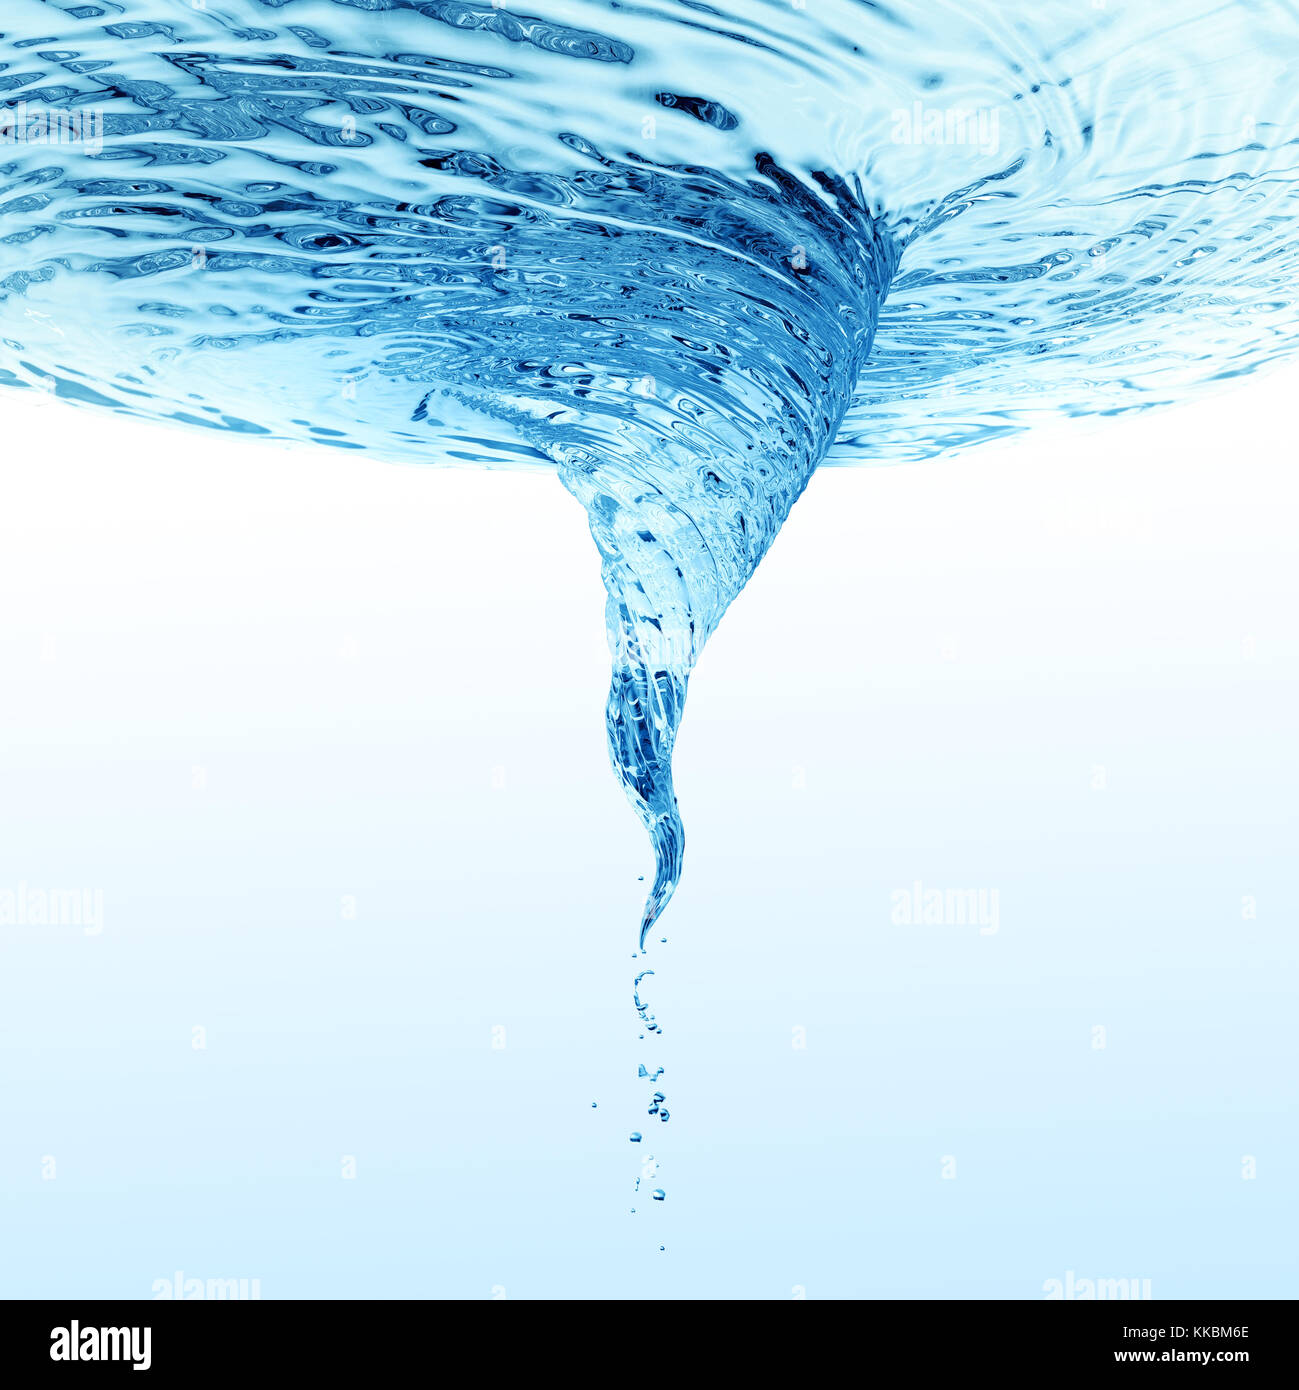 Water vortex - Stock Image - F016/7078 - Science Photo Library